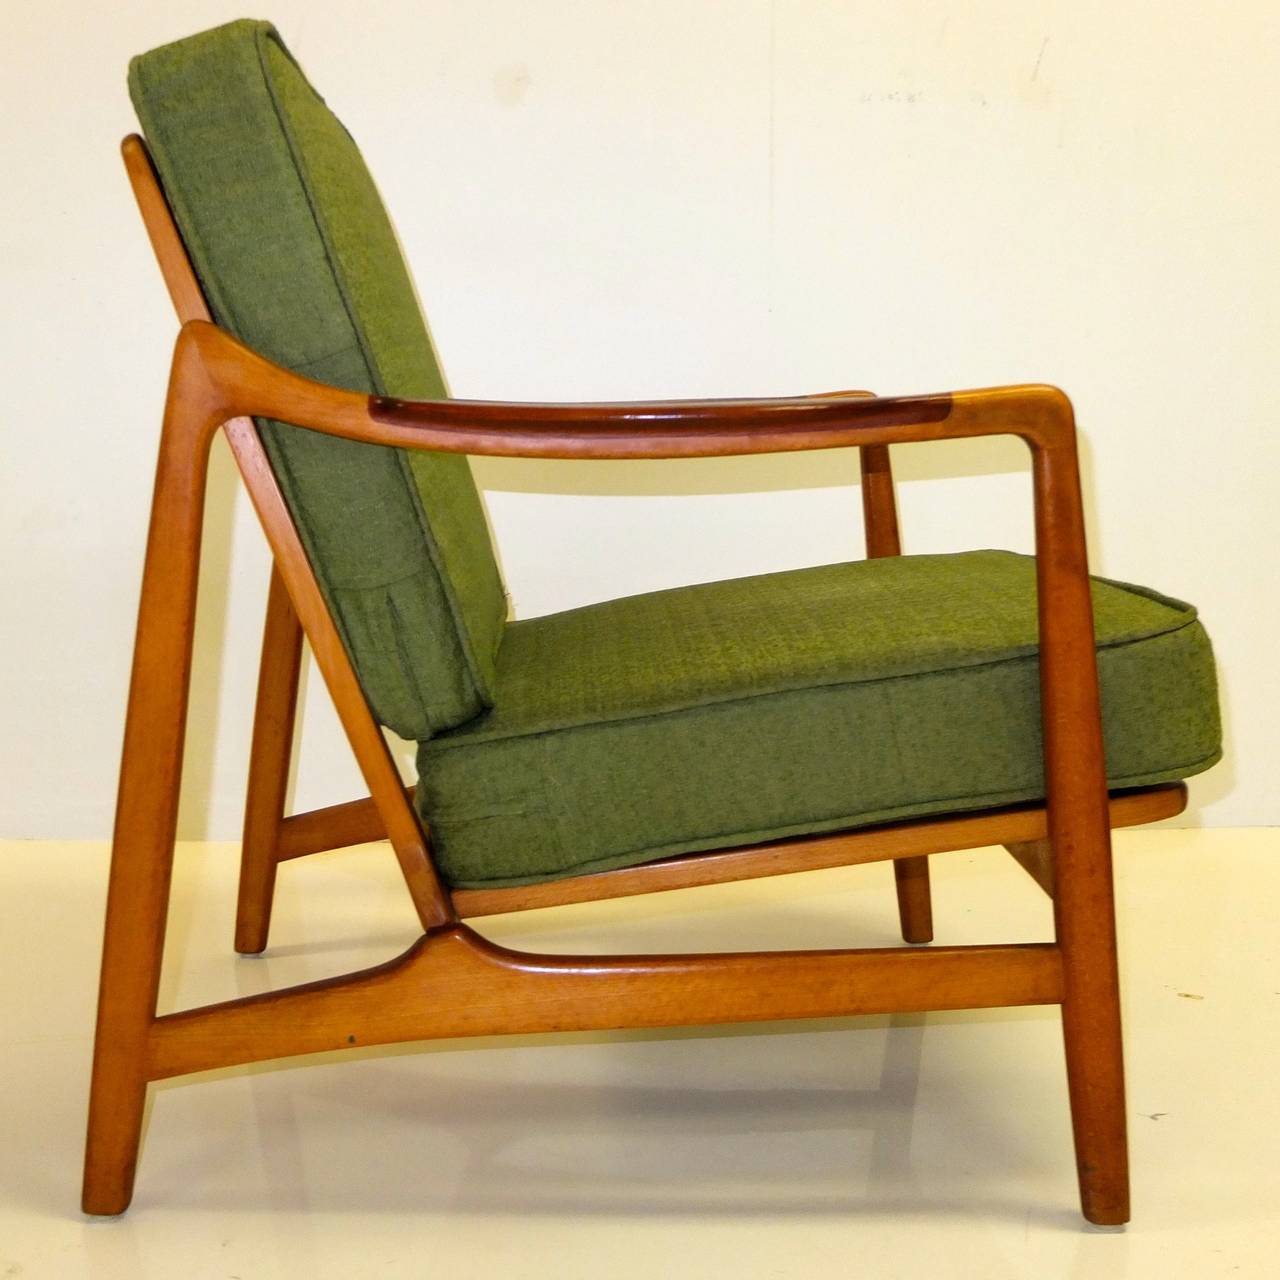 Uncommon design classic by Tove & Edvard Kindt-Larsen produced in Denmark by France & Daverkosen circa 1955 and retailed through John Stuart, New York. Shaped mahogany armrests on contrasting beech frame with keyhole joints allowing this chair to